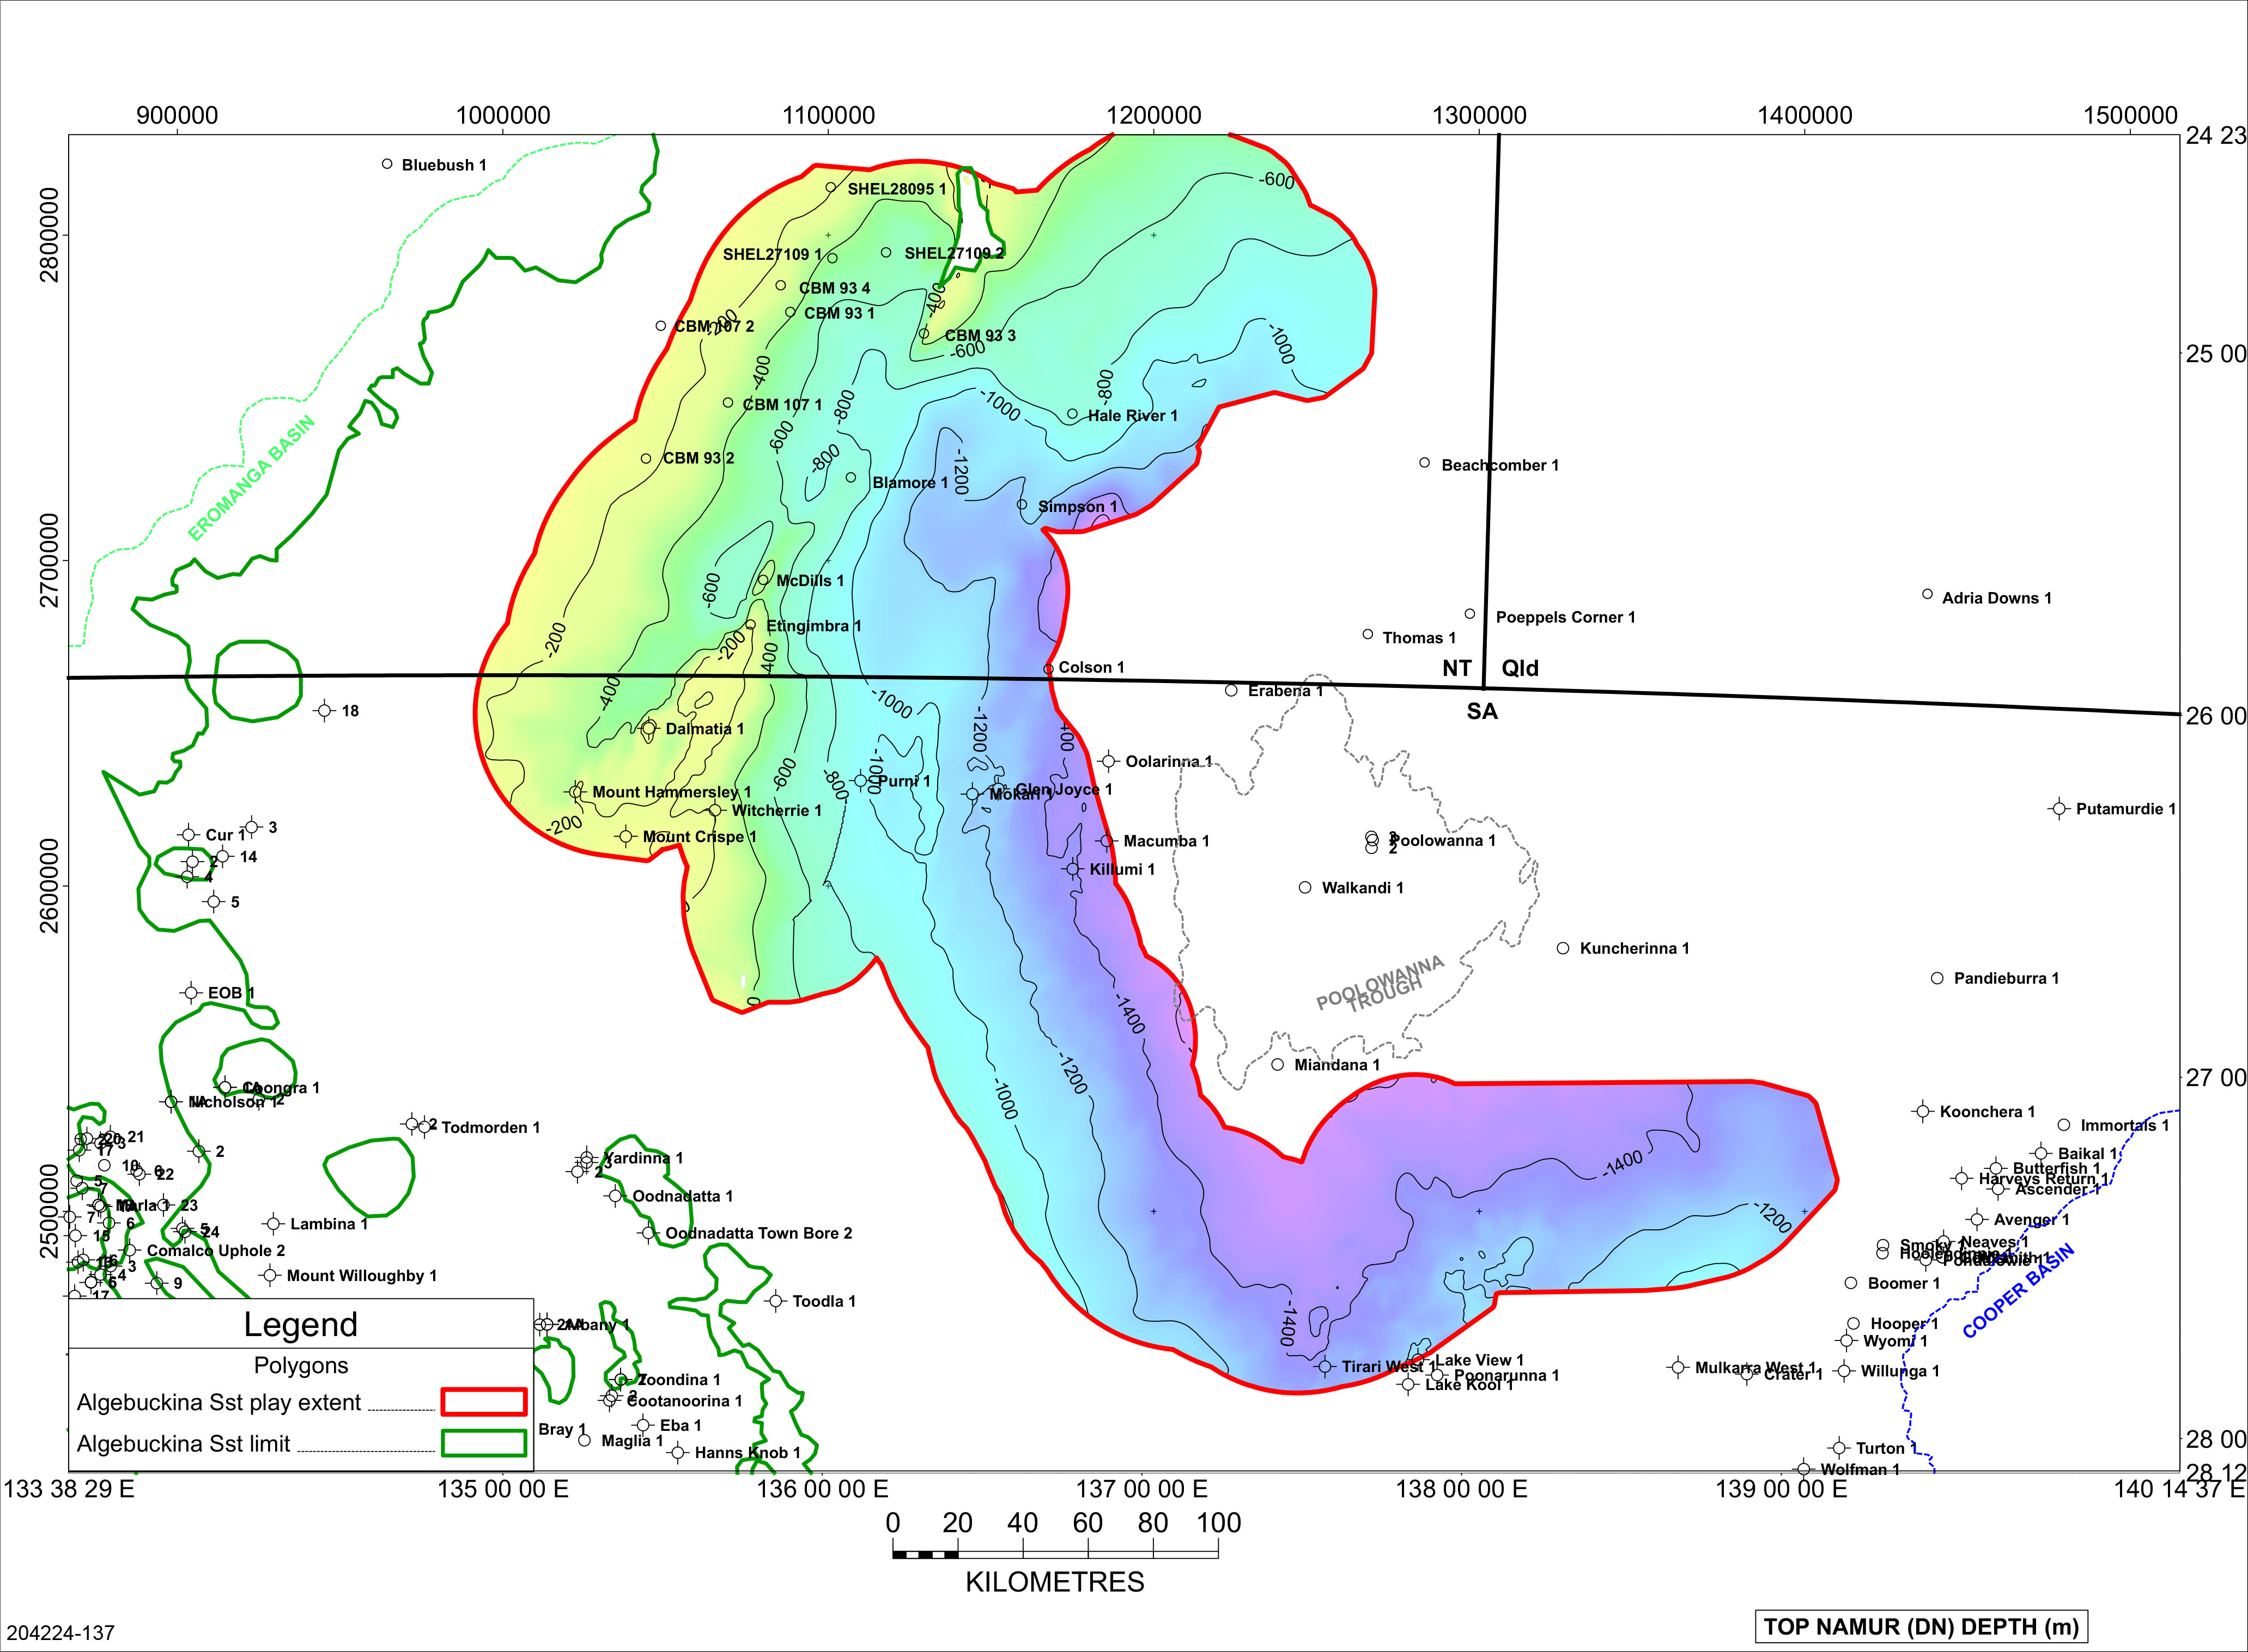 Approximate extent of the Algebuckina Sandstone play in the Poolowanna Trough region.